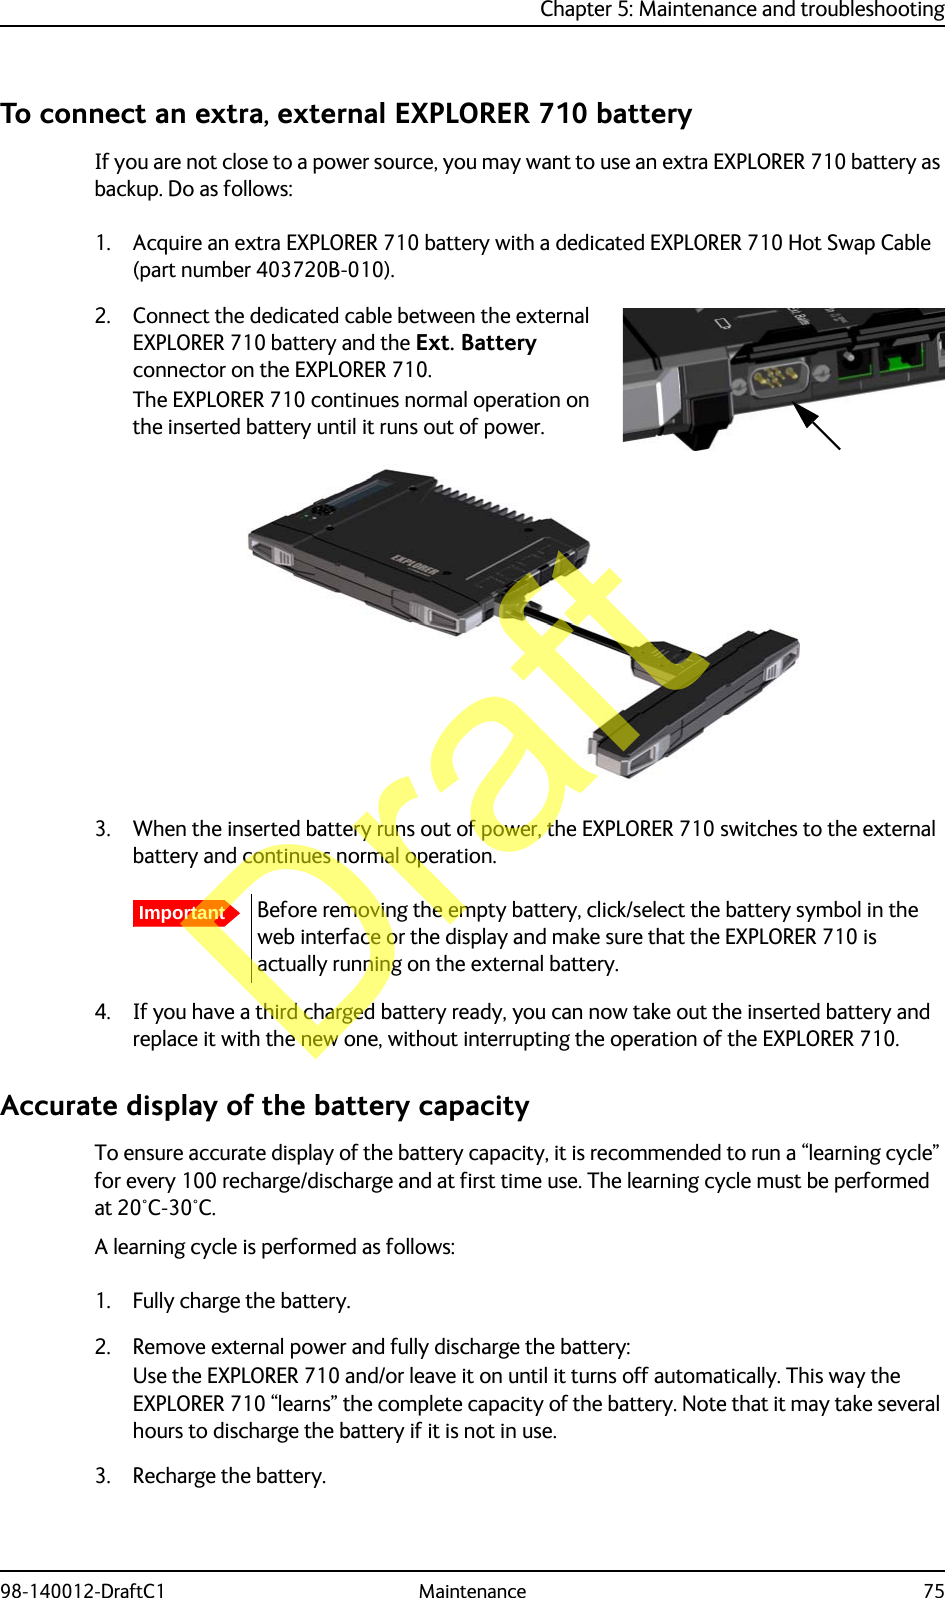 Chapter 5: Maintenance and troubleshooting98-140012-DraftC1 Maintenance 75To connect an extra, external EXPLORER 710 batteryIf you are not close to a power source, you may want to use an extra EXPLORER 710 battery as backup. Do as follows:1. Acquire an extra EXPLORER 710 battery with a dedicated EXPLORER 710 Hot Swap Cable (part number 403720B-010).2. Connect the dedicated cable between the external EXPLORER 710 battery and the Ext. Battery connector on the EXPLORER 710.The EXPLORER 710 continues normal operation on the inserted battery until it runs out of power.3. When the inserted battery runs out of power, the EXPLORER 710 switches to the external battery and continues normal operation.4. If you have a third charged battery ready, you can now take out the inserted battery and replace it with the new one, without interrupting the operation of the EXPLORER 710.Accurate display of the battery capacityTo ensure accurate display of the battery capacity, it is recommended to run a “learning cycle” for every 100 recharge/discharge and at first time use. The learning cycle must be performed at 20°C-30°C.A learning cycle is performed as follows:1. Fully charge the battery.2. Remove external power and fully discharge the battery:Use the EXPLORER 710 and/or leave it on until it turns off automatically. This way the EXPLORER 710 “learns” the complete capacity of the battery. Note that it may take several hours to discharge the battery if it is not in use.3. Recharge the battery.ImportantBefore removing the empty battery, click/select the battery symbol in the web interface or the display and make sure that the EXPLORER 710 is actually running on the external battery.Draft